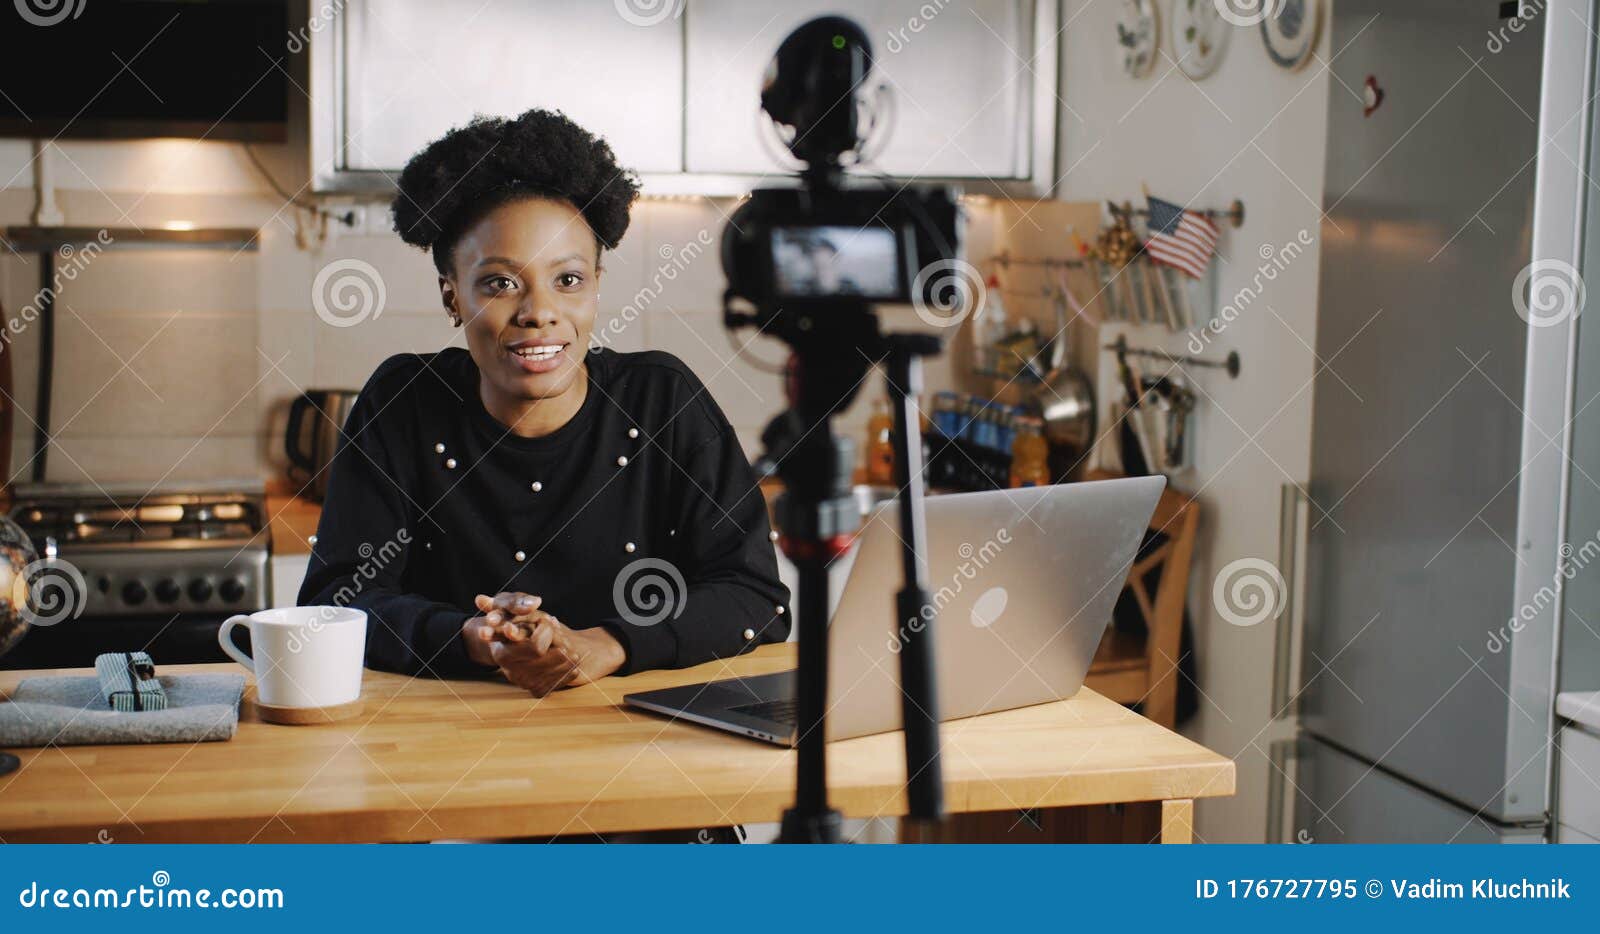 happy smiling young beautiful black vlogger woman filming new video using professional camera at home table slow motion.